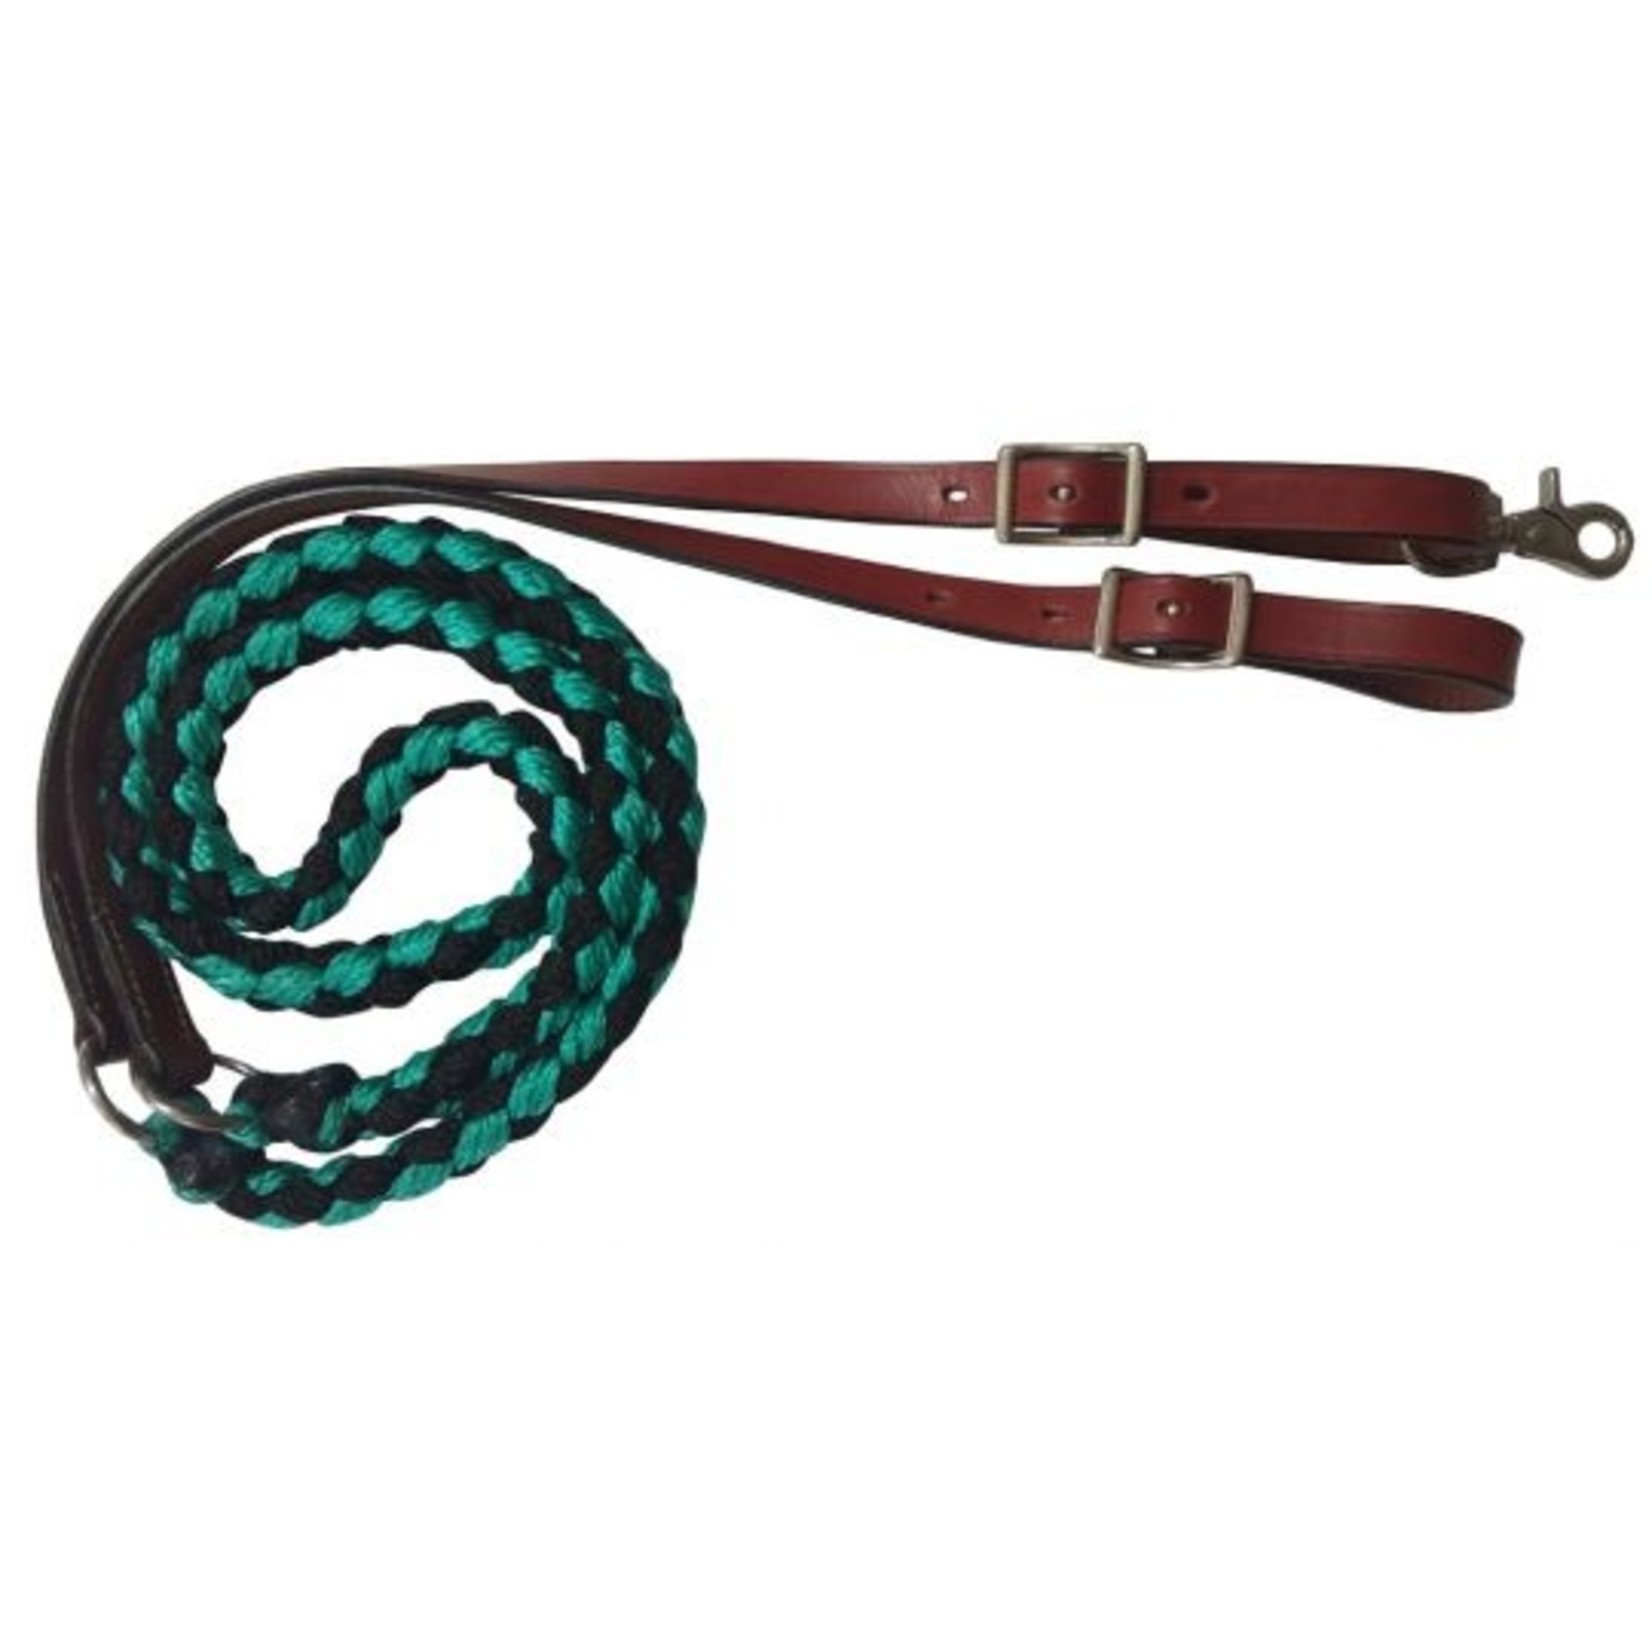 8 Ft Nylon Braided Contest Reins w/ Leather Ends